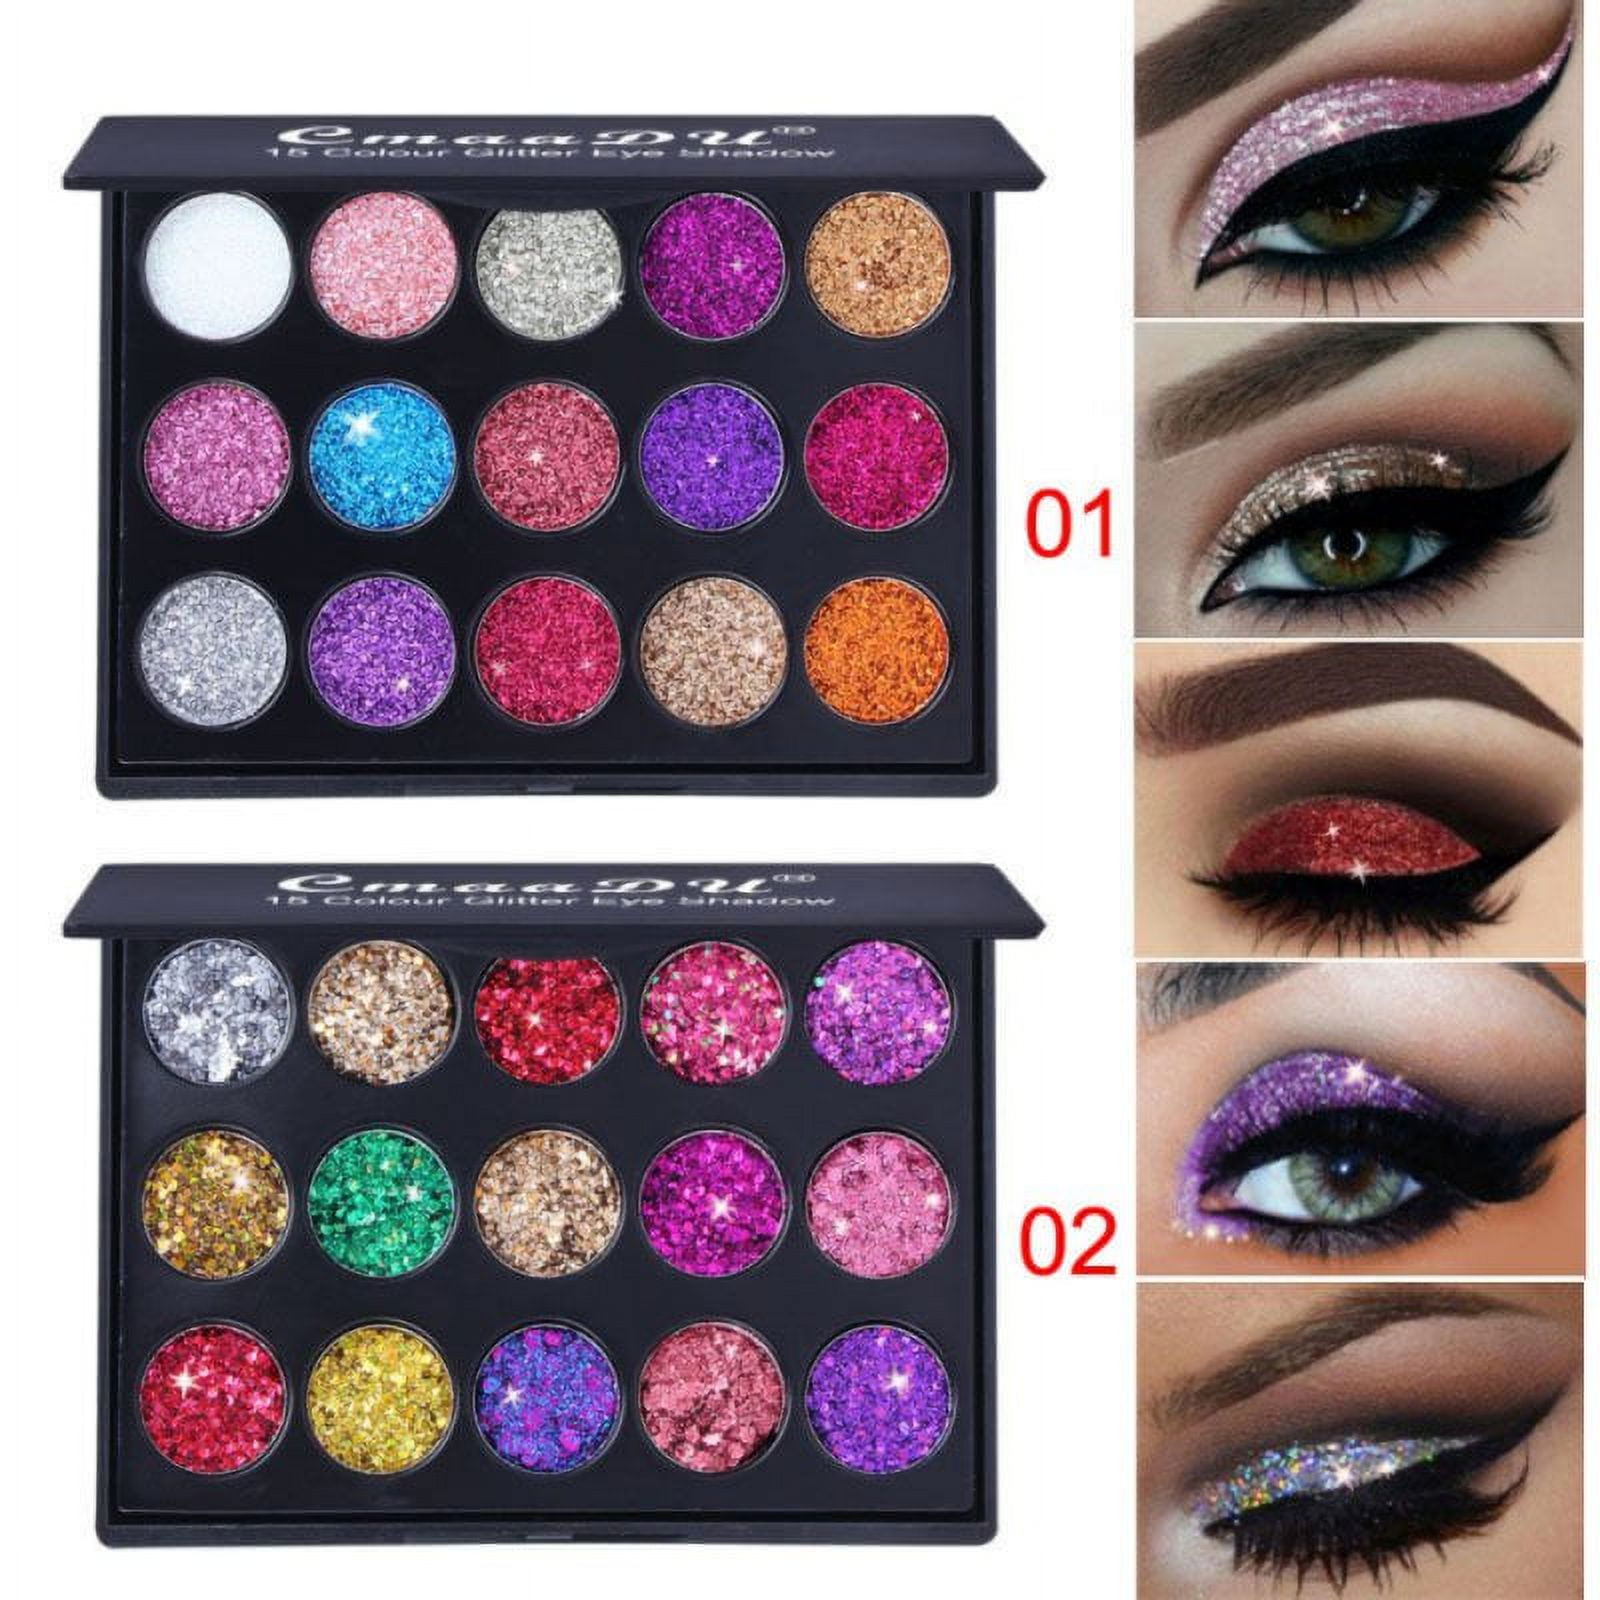 Eyeshadow Palette, Professional 15 Color Eye Shadow Matte Shimmer